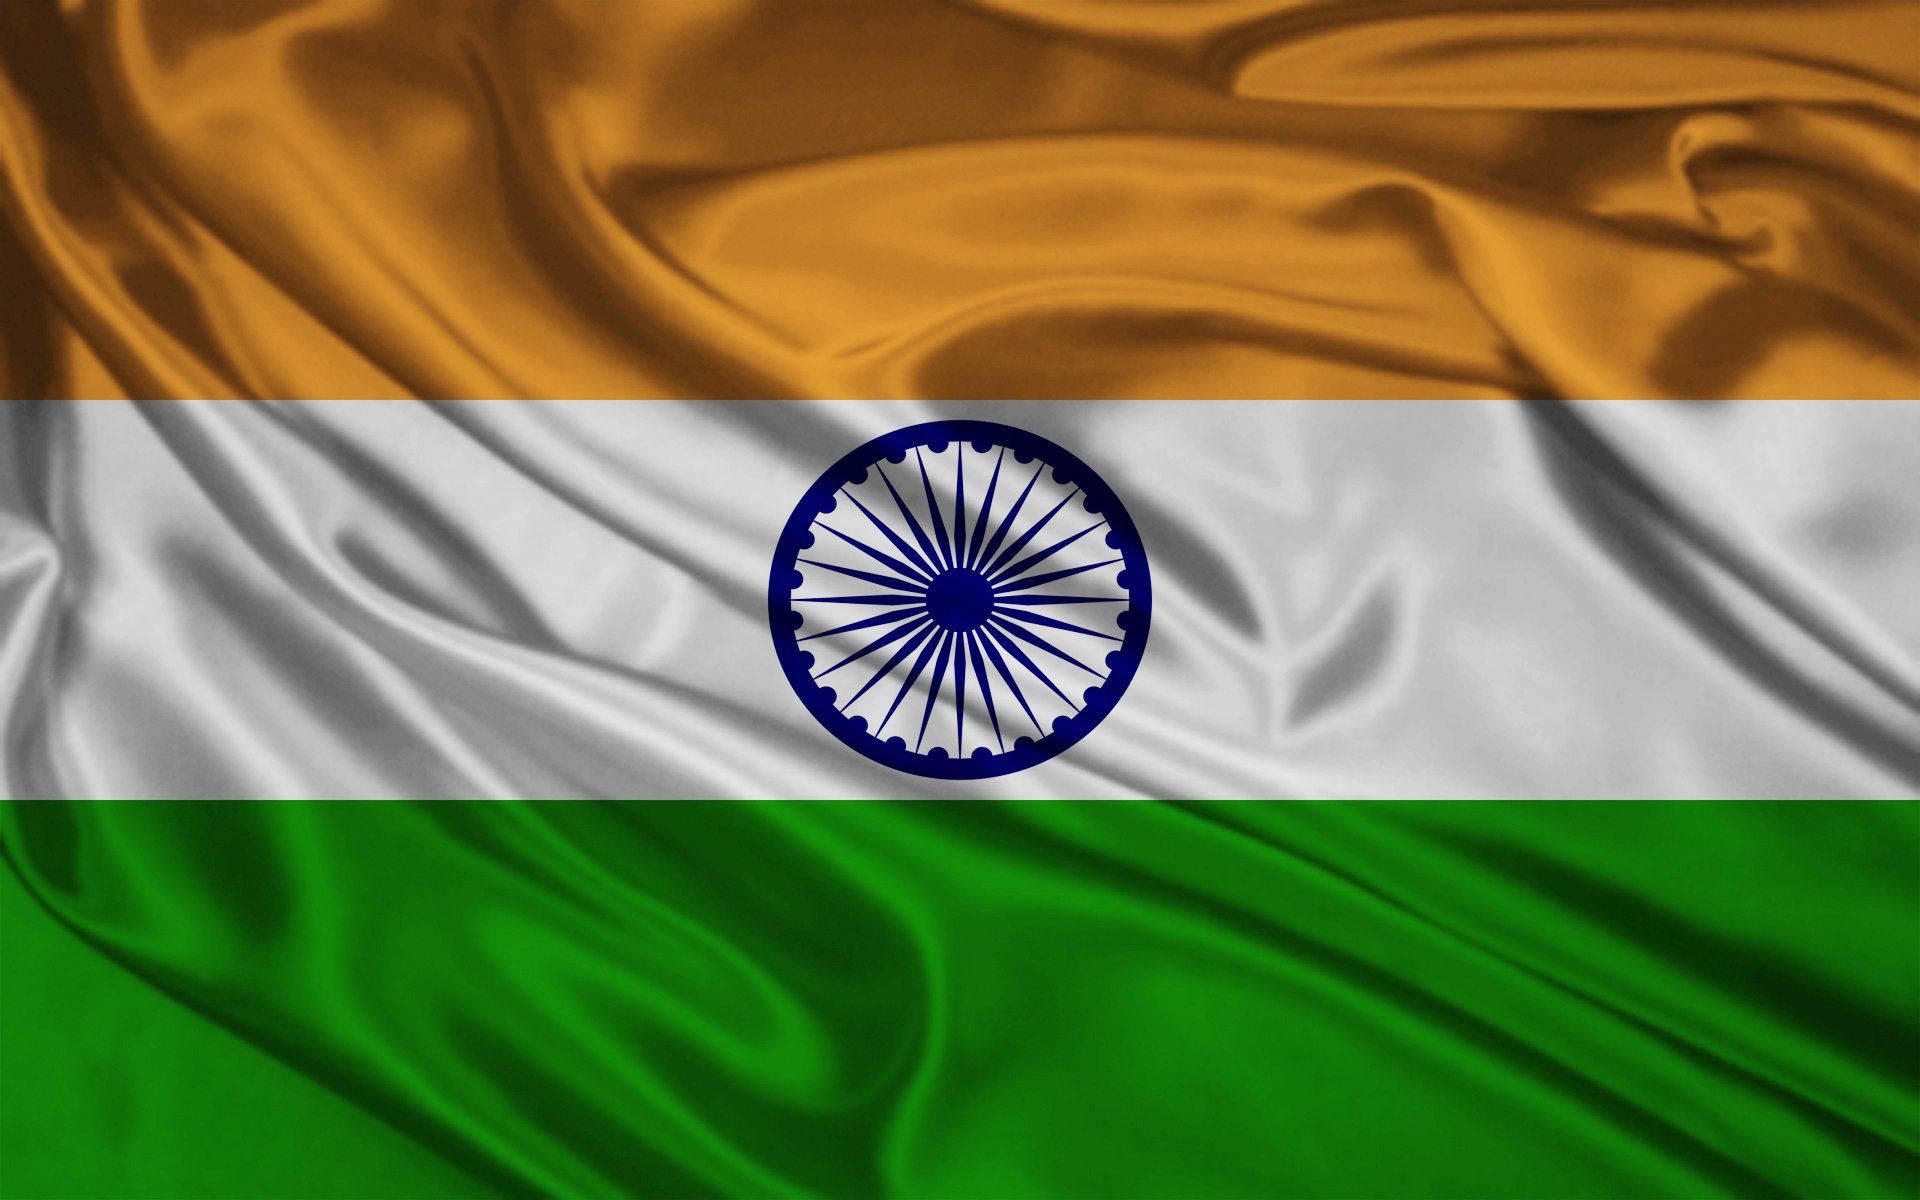 Details 100 indian flag background hd images - Abzlocal.mx